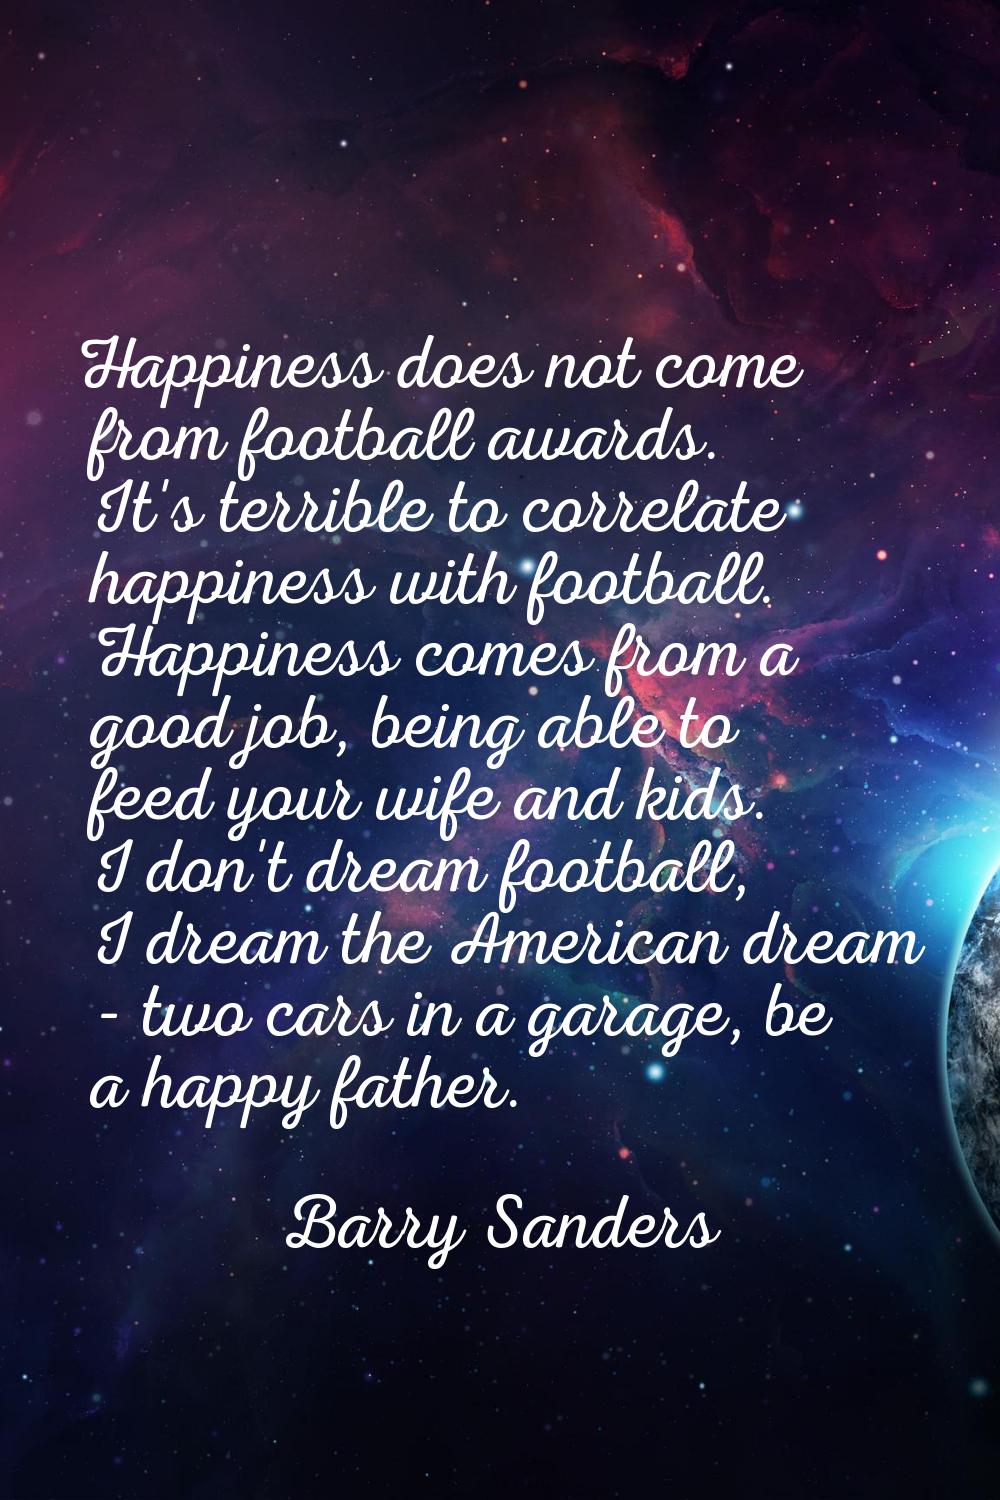 Happiness does not come from football awards. It's terrible to correlate happiness with football. H